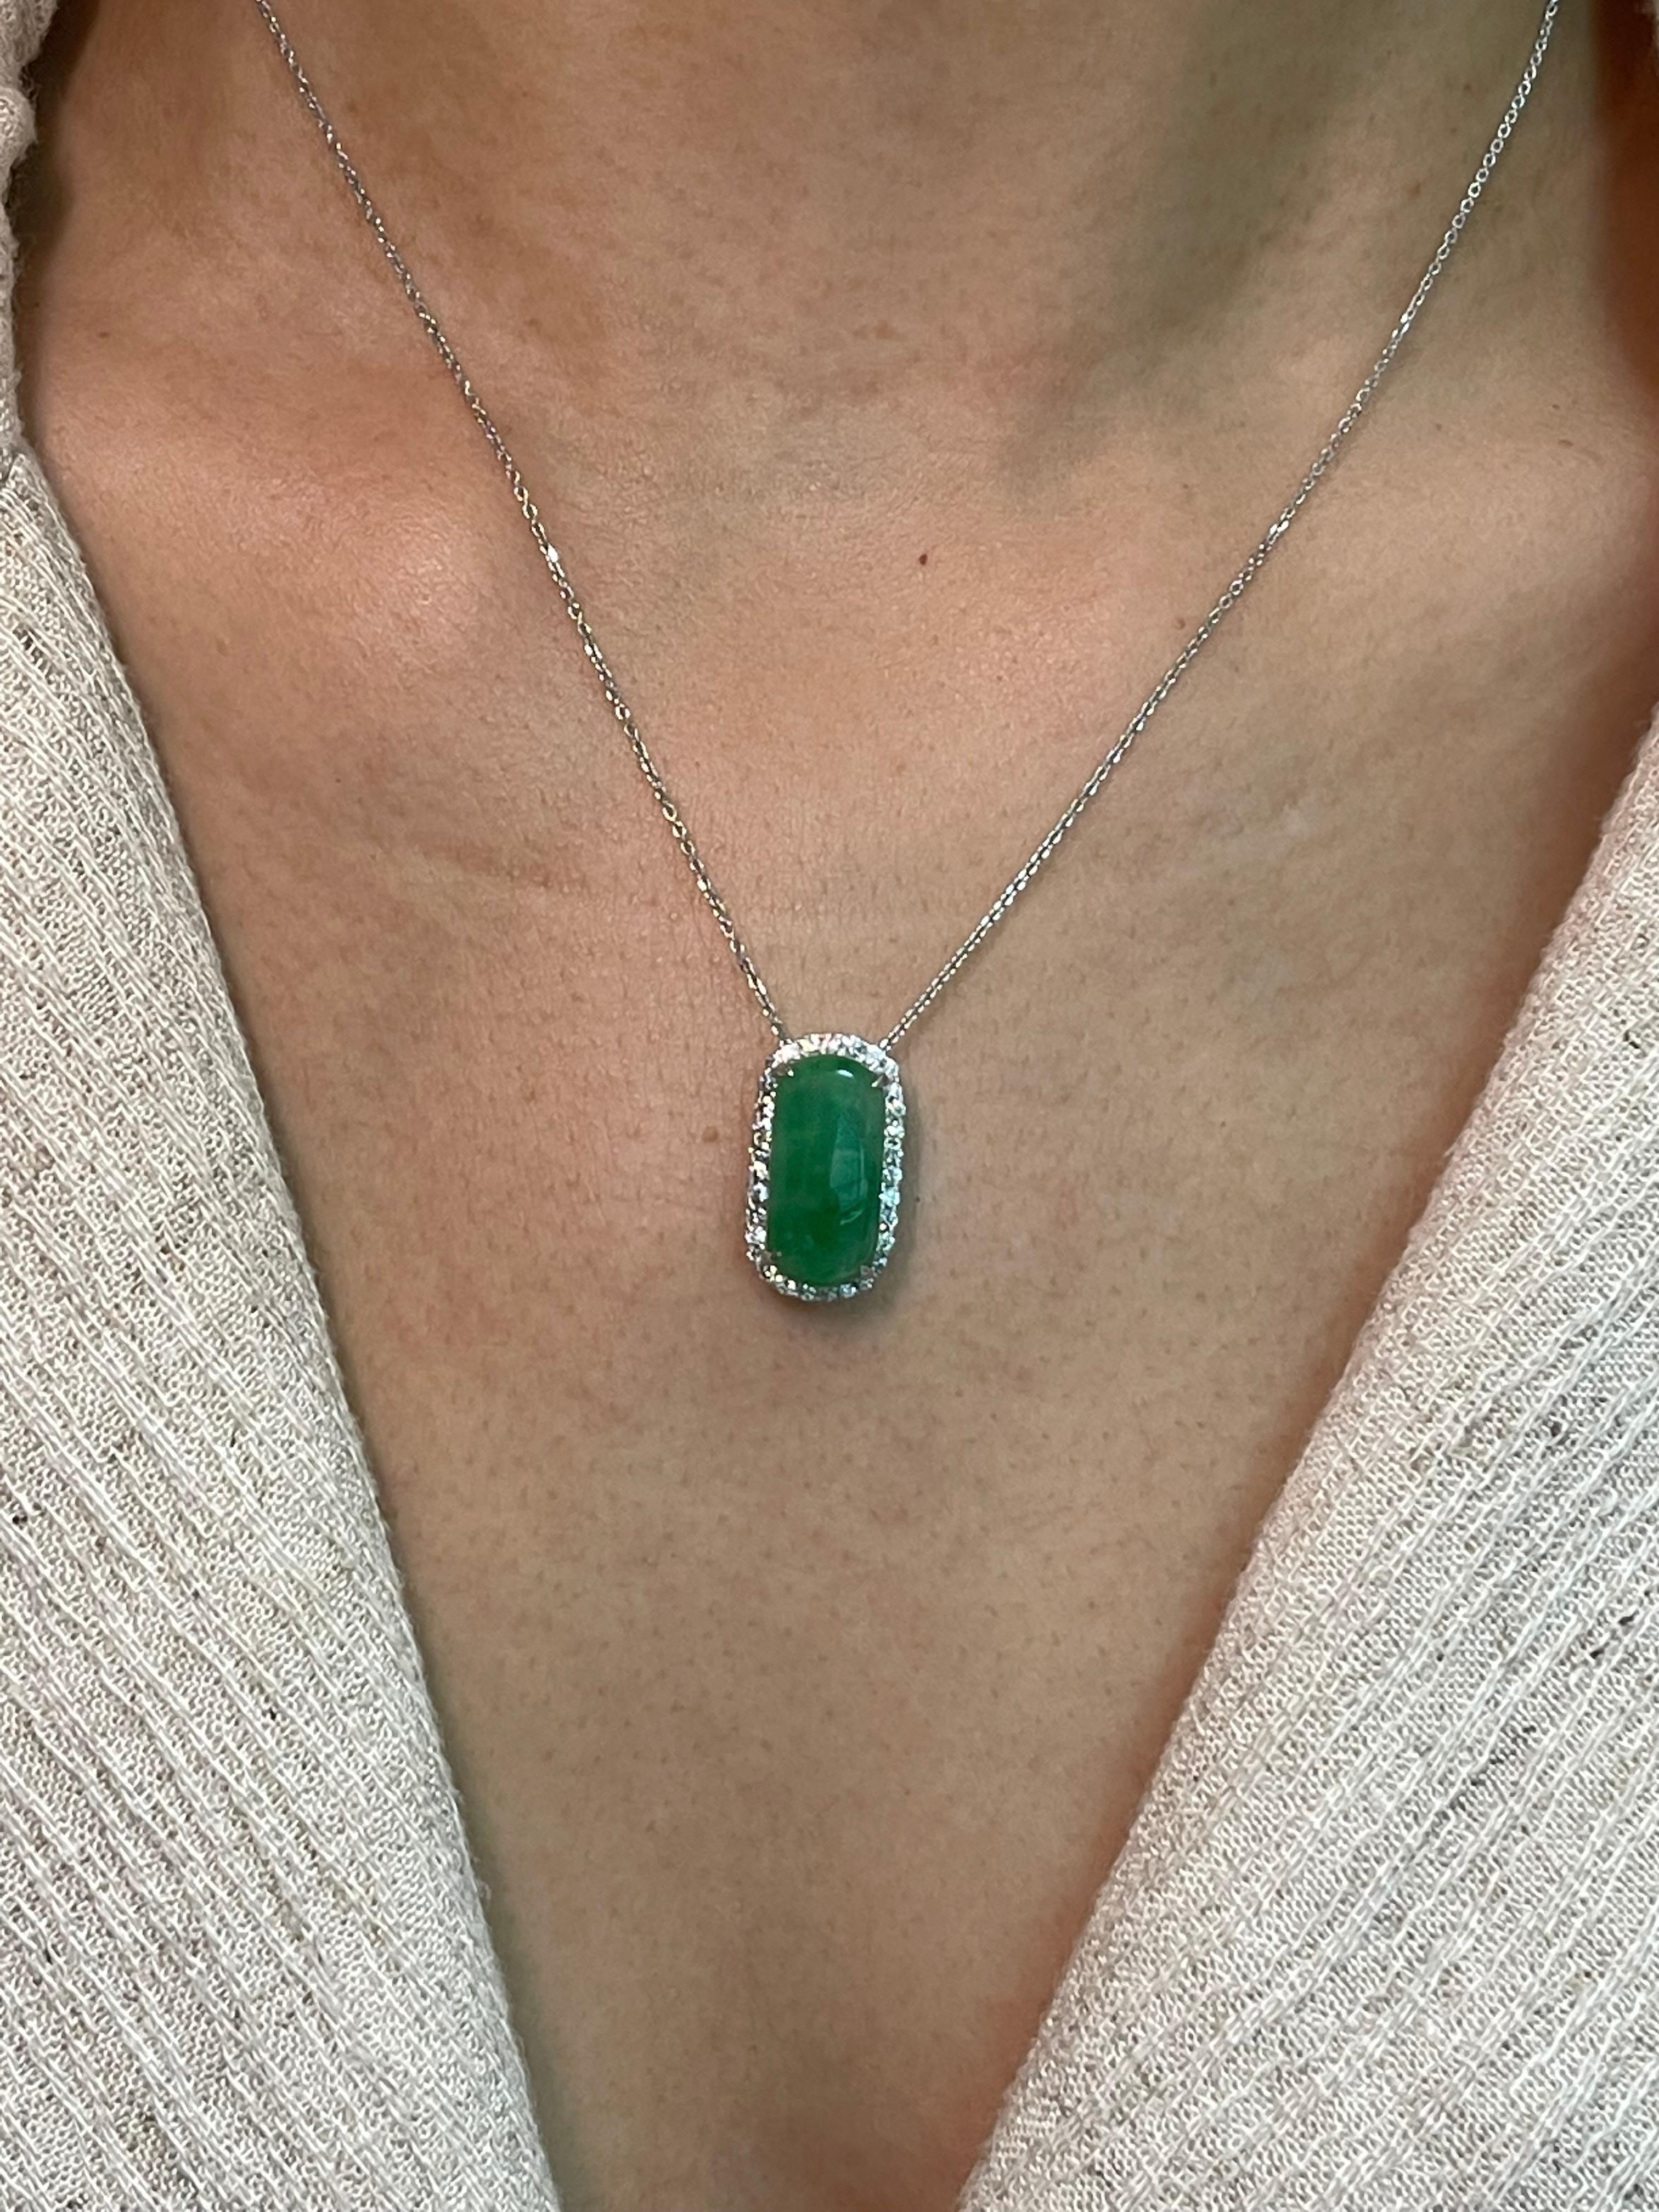 Here is a natural apple green Jade and diamond pendant. It is certified. The pendant is set in 18k white gold and diamonds. There are 0.30 cts of small round diamonds that surrounds the apple green jade. The untreated / unenhanced natural jade is